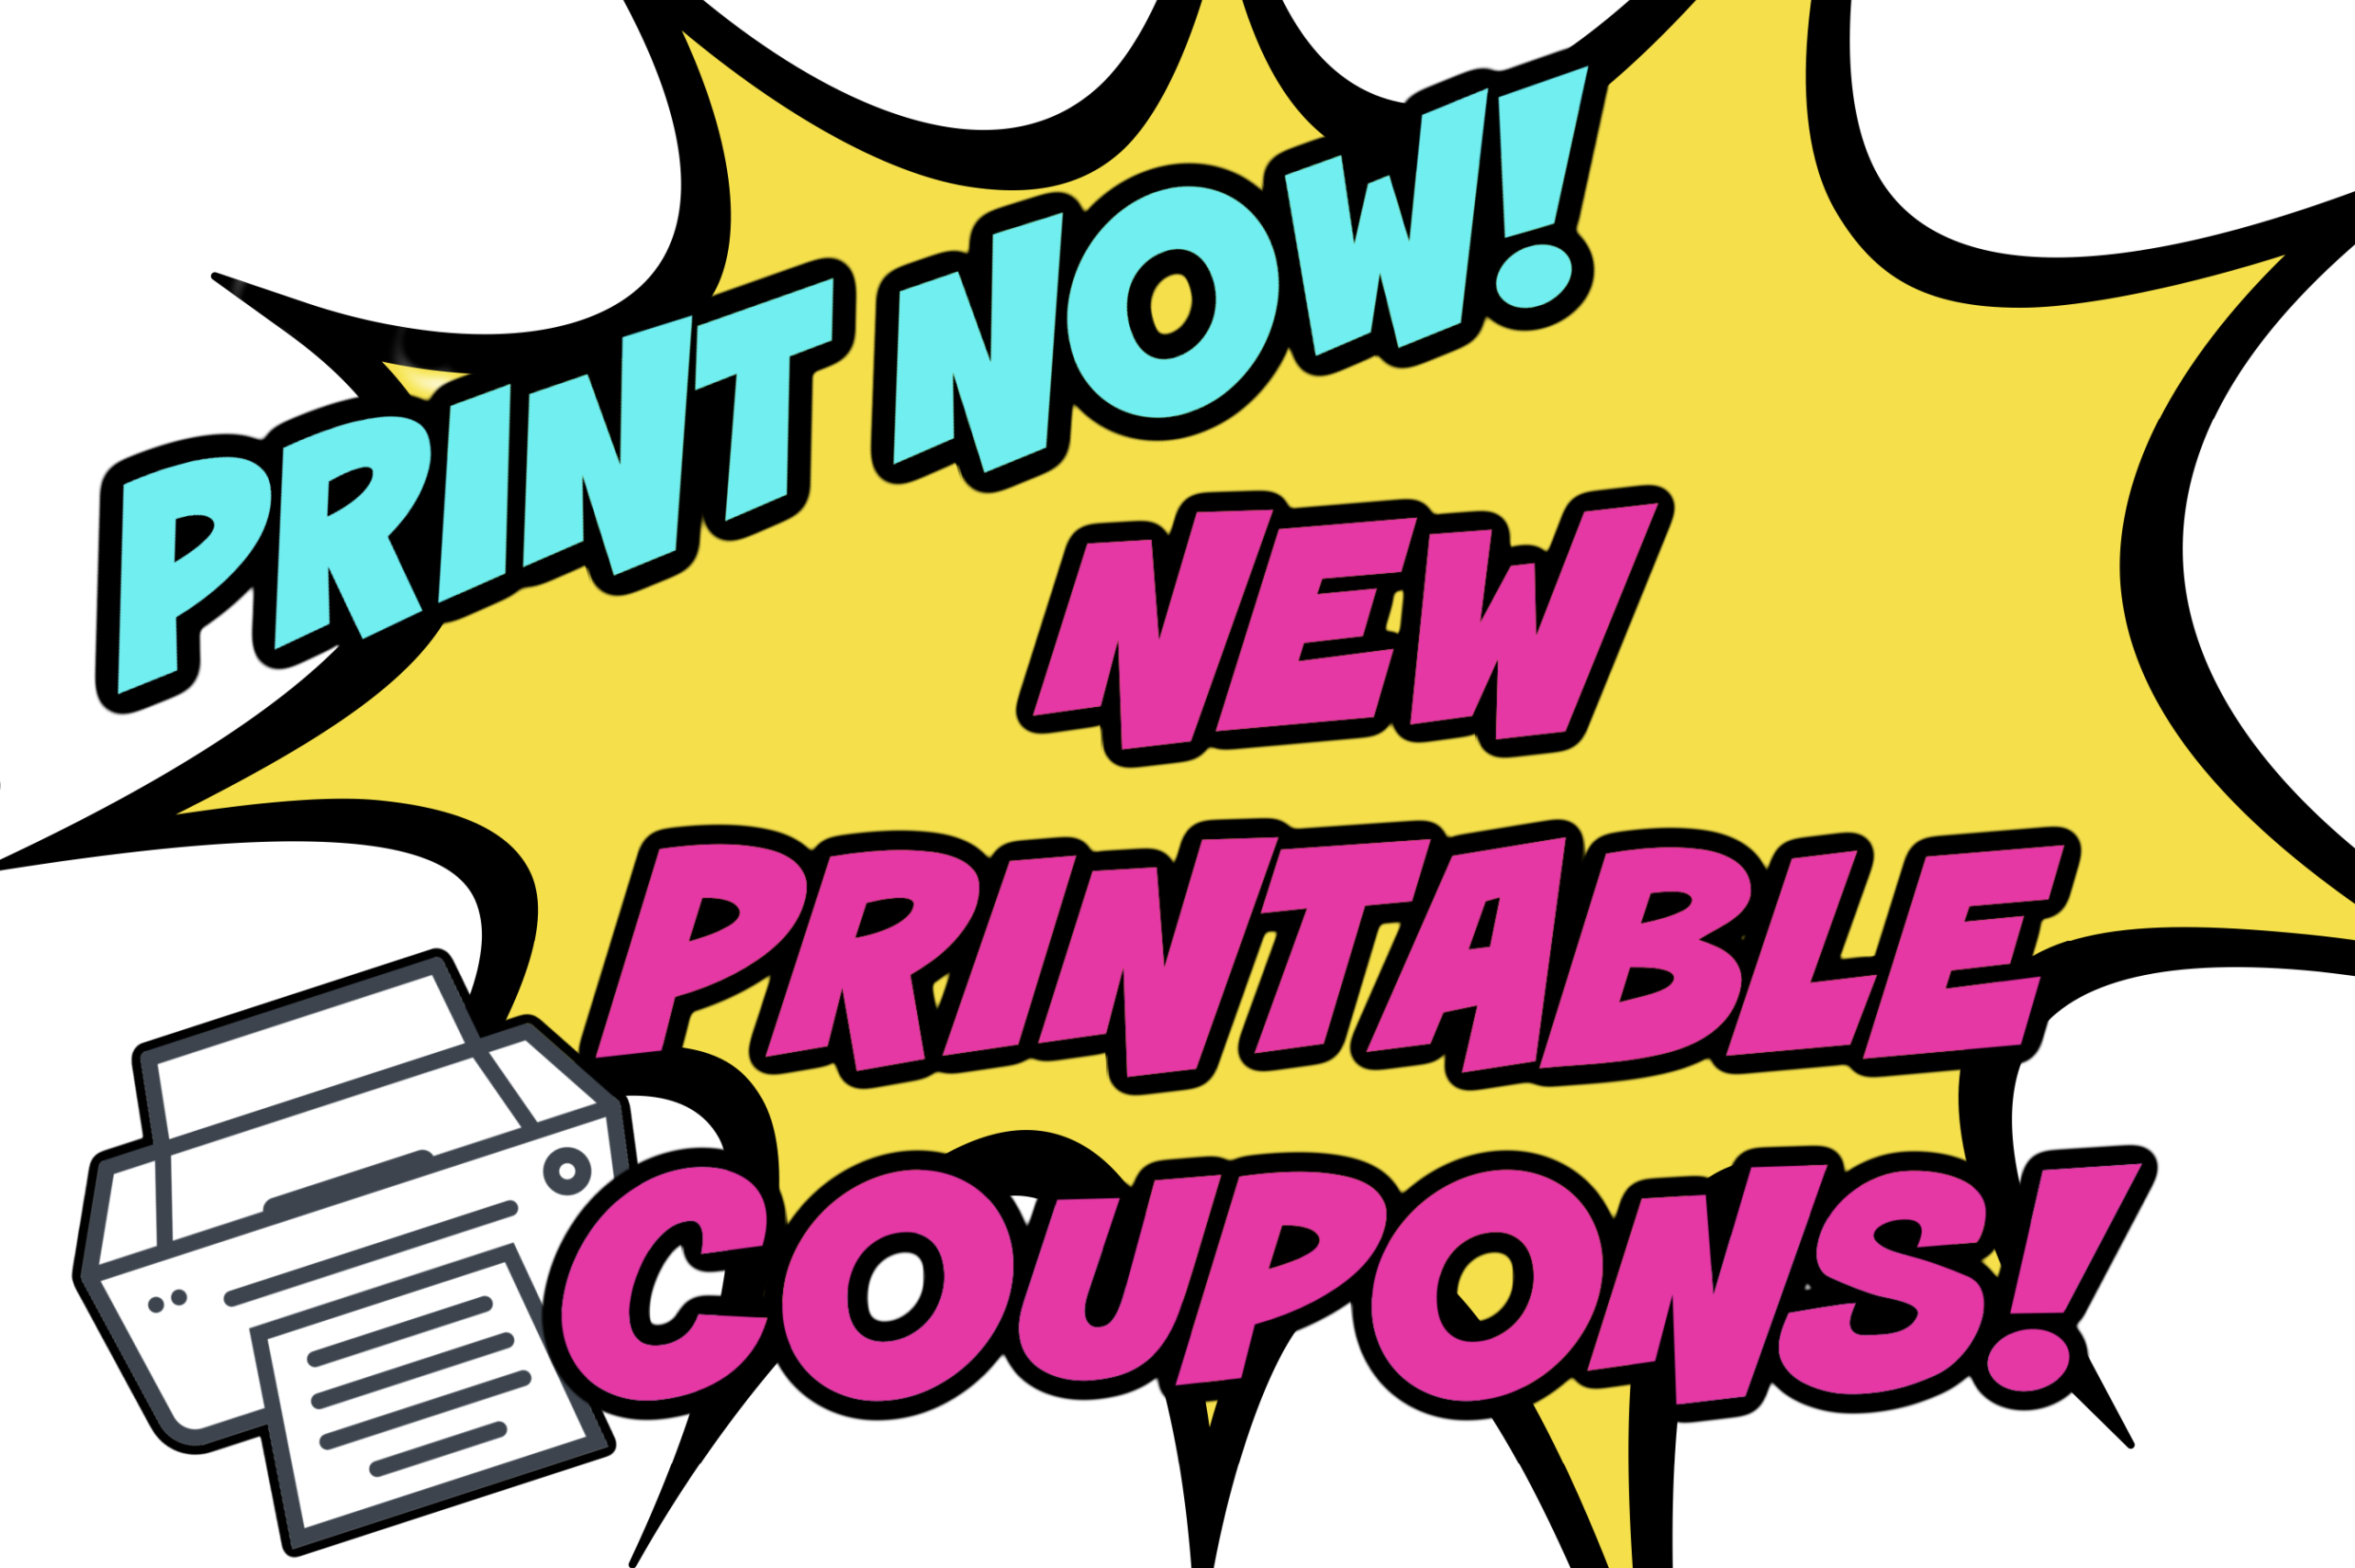 PRINT NOW! NEW HIGHVALUE PRINTABLE COUPONS PERSIL, COVERGIRL